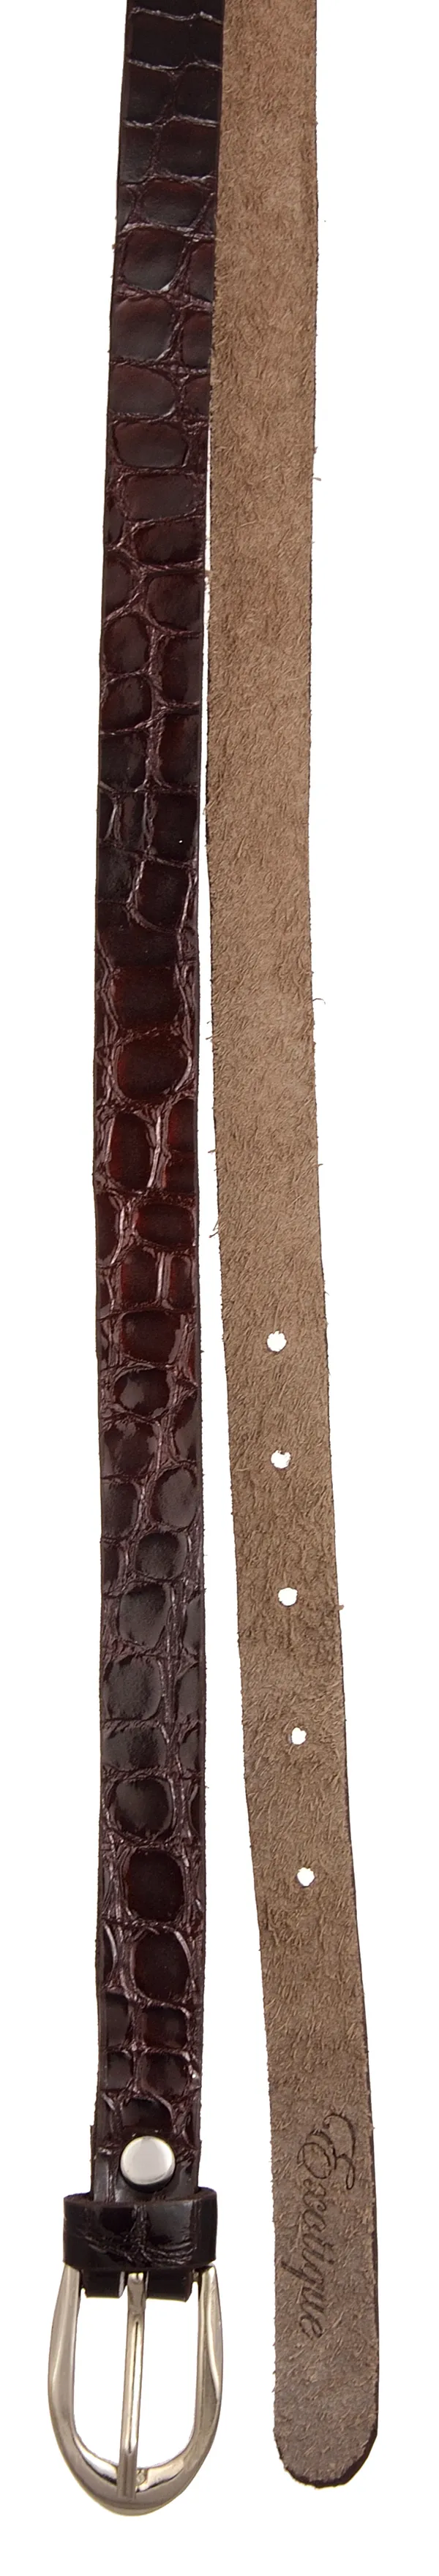 Exotique_Brown_Casual_Leather_Belt_For_Women_(BW0009BR)__Exotique